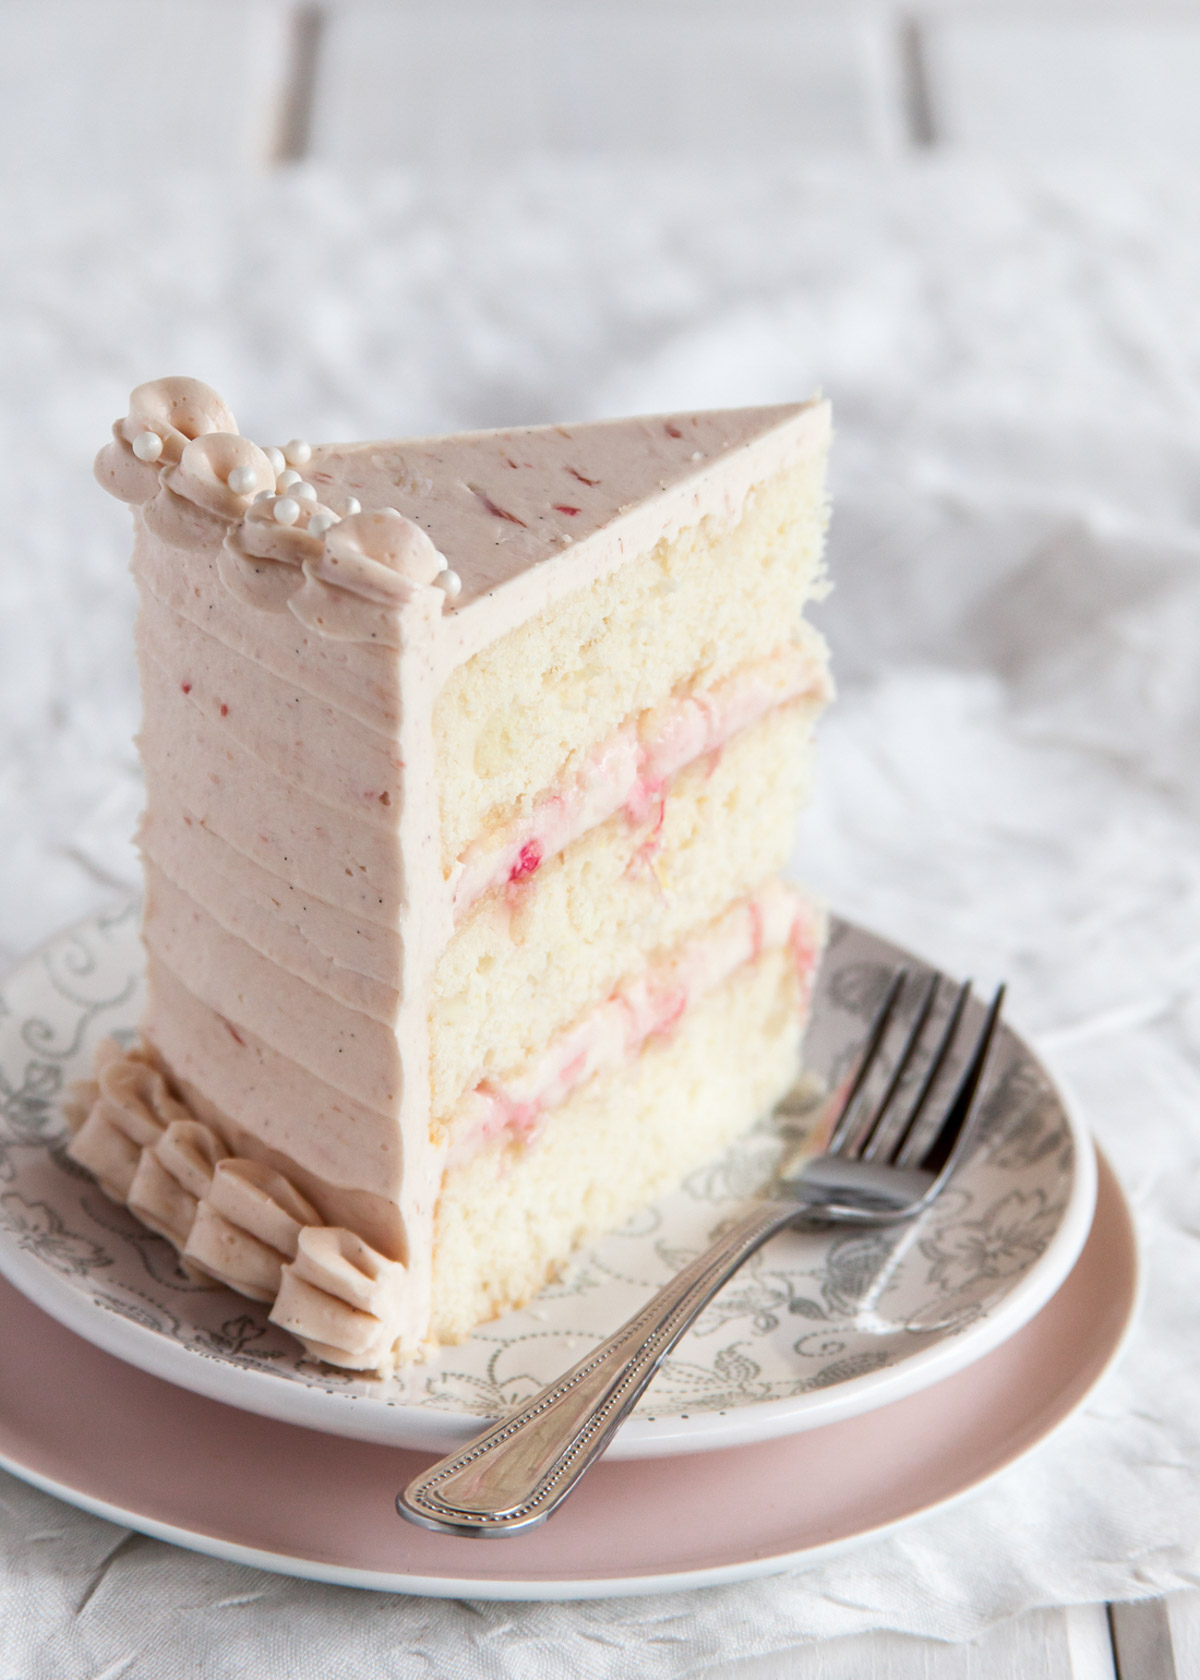 A slice of three-layer ginger cake with poached rhubarb filling and pink frosting.